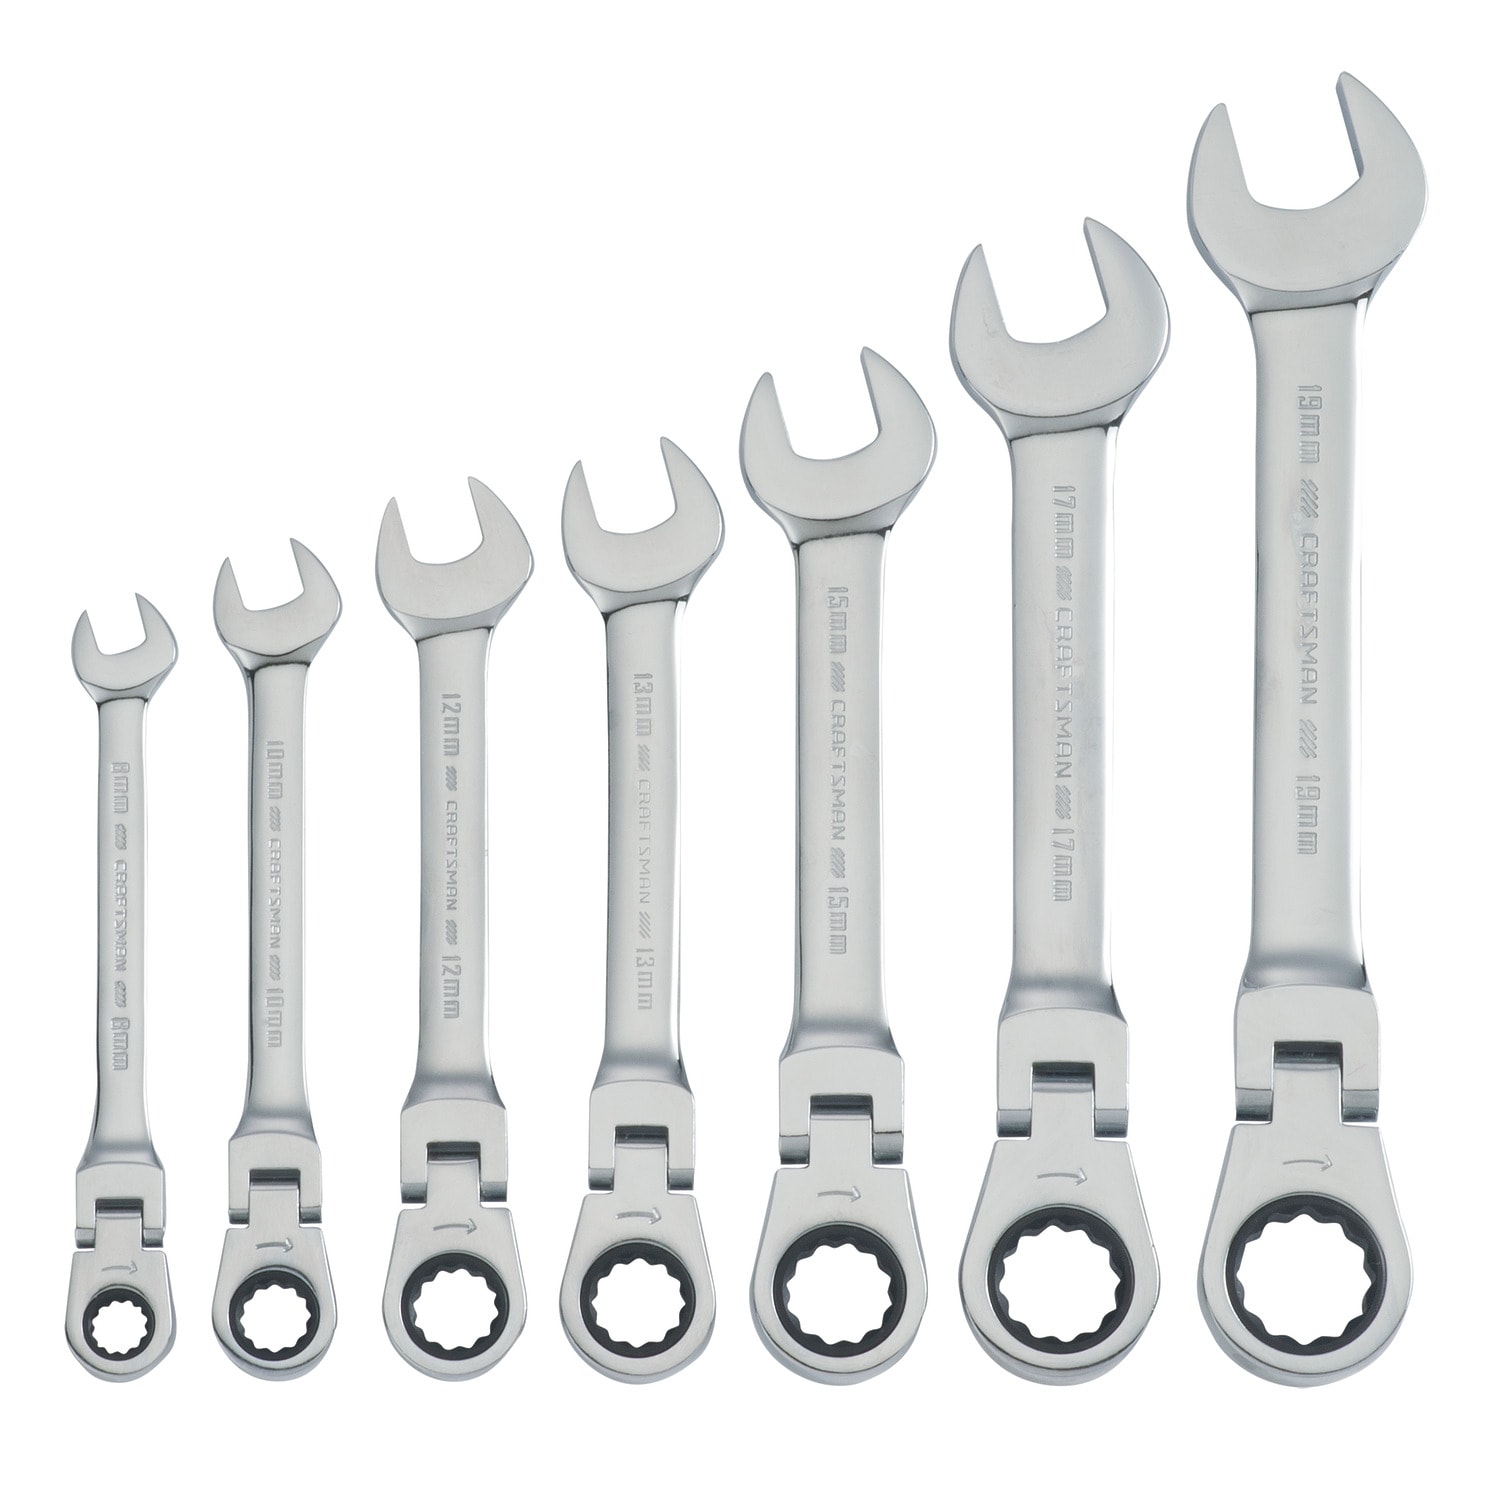 CRAFTSMAN Ratchet Wrenches & Sets at Lowes.com